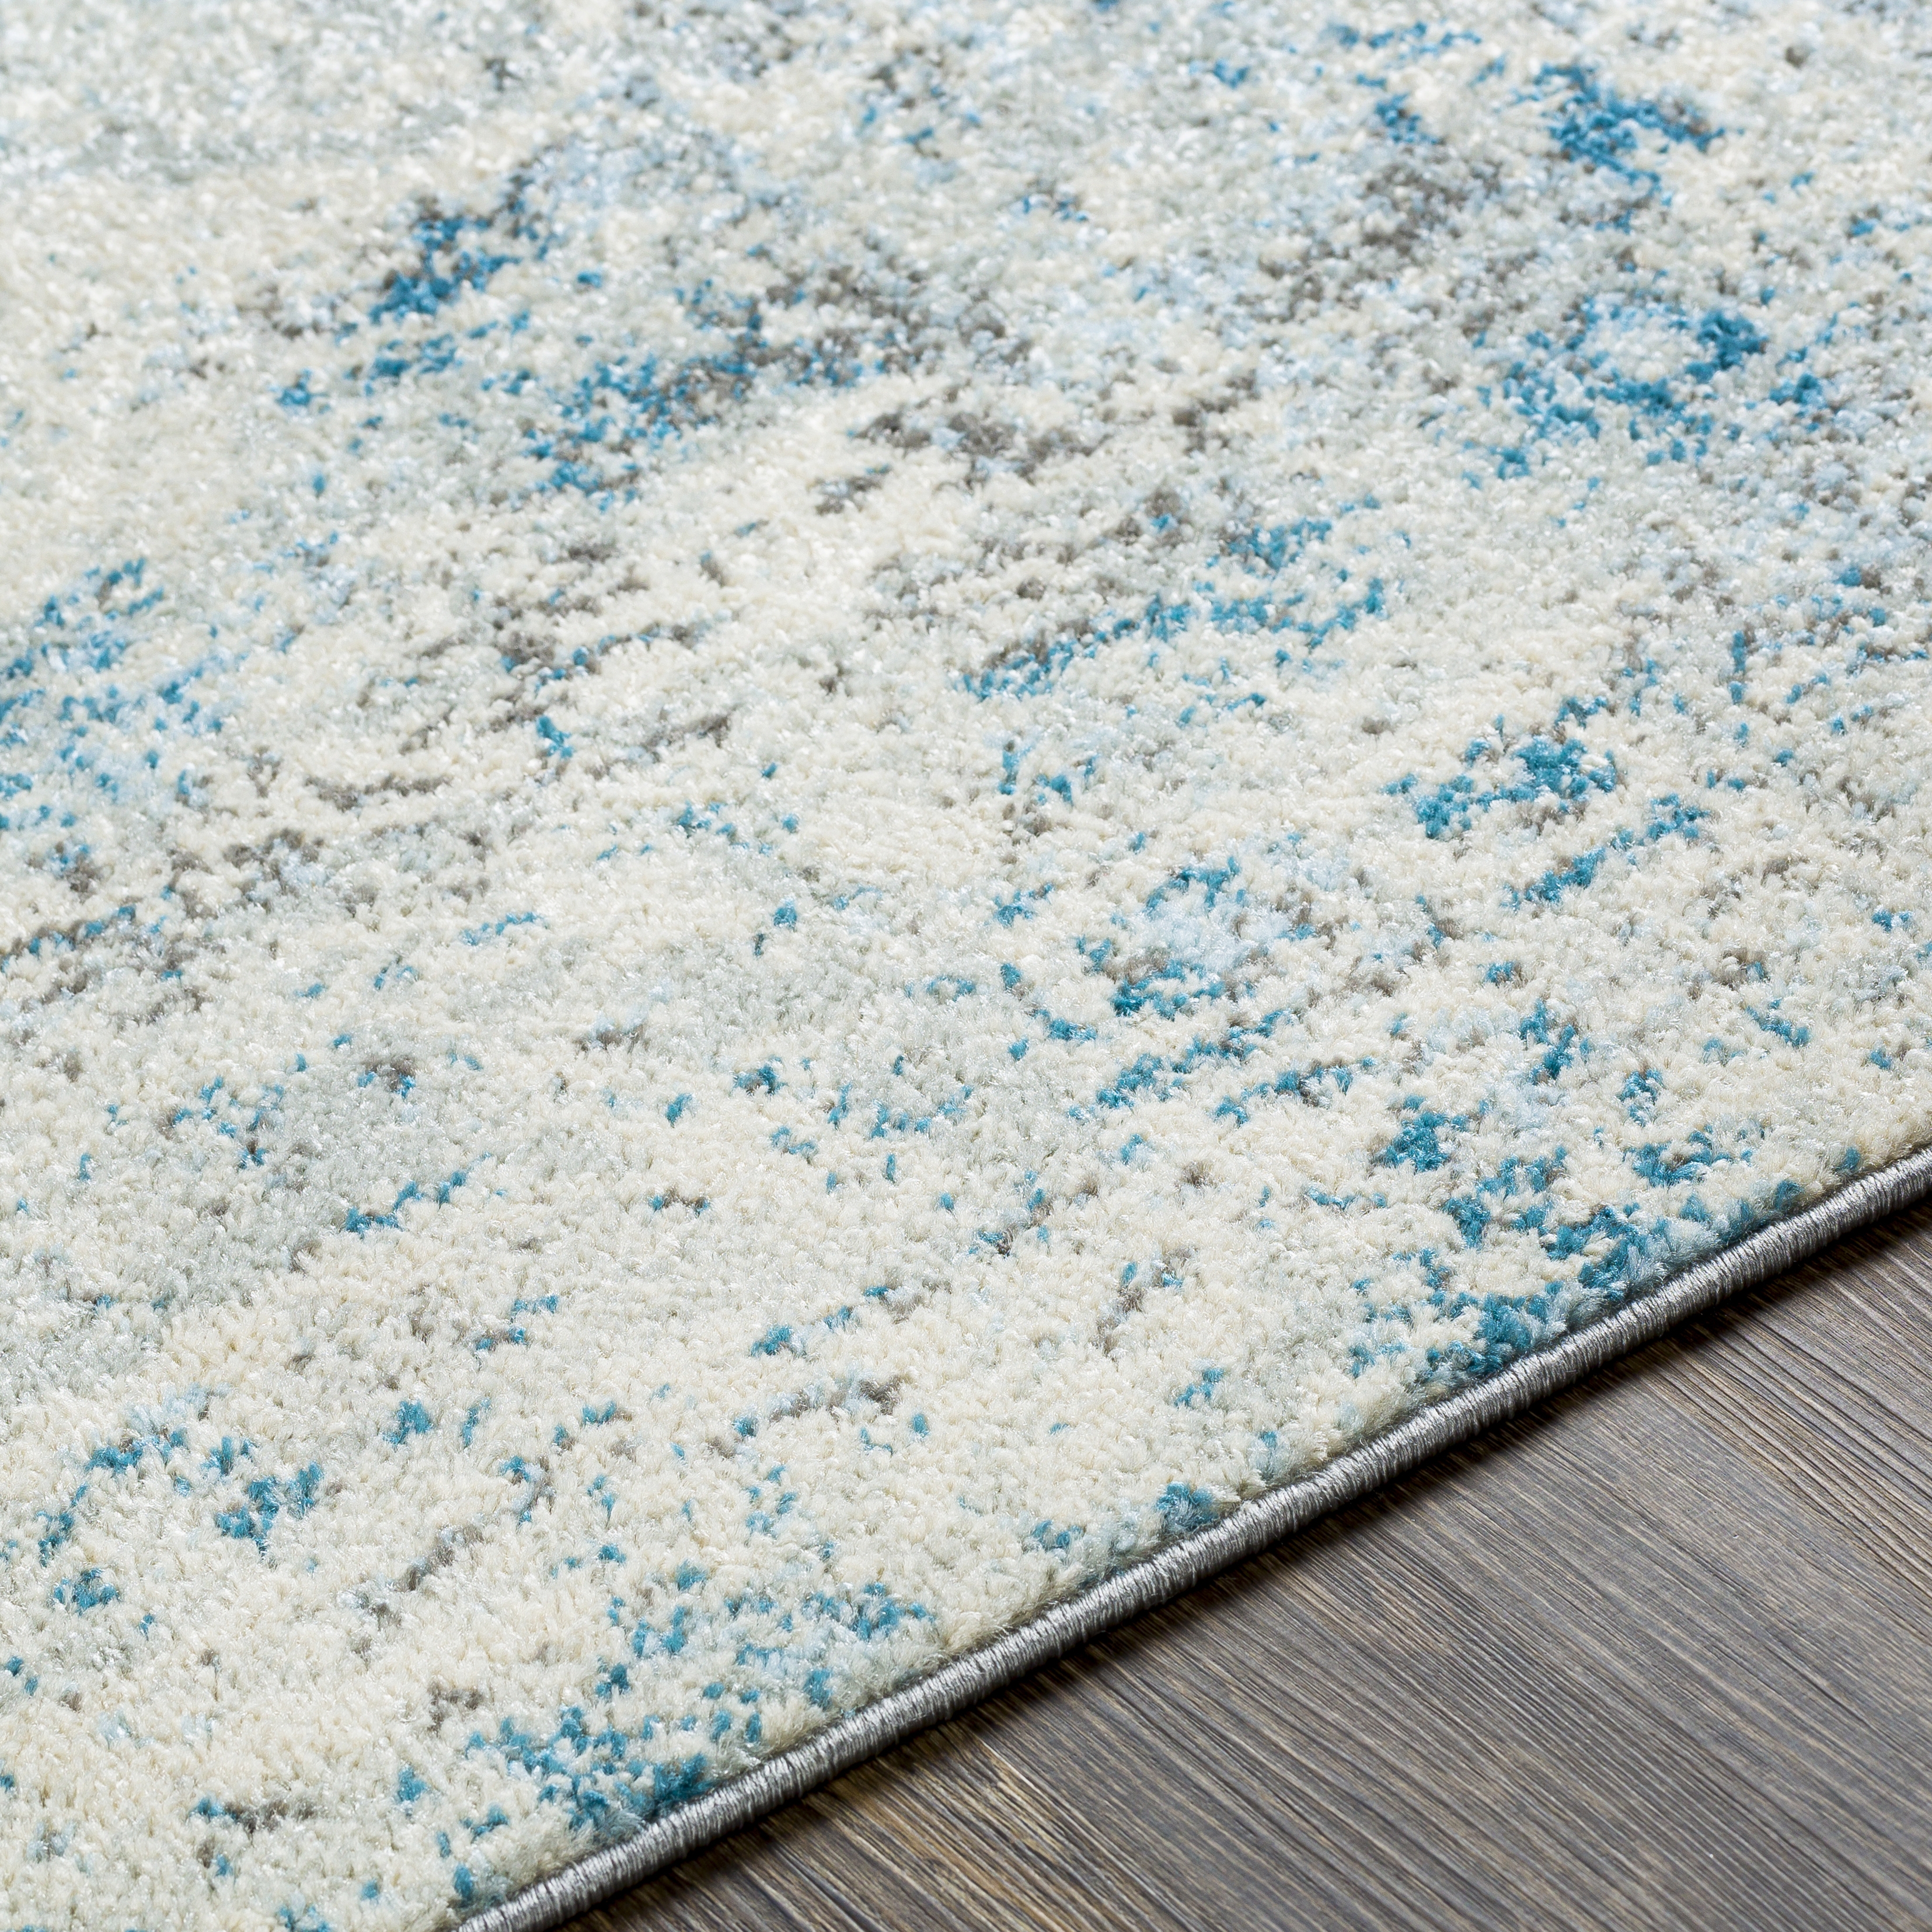 Chester Rug, 6'7" x 9' - Image 3